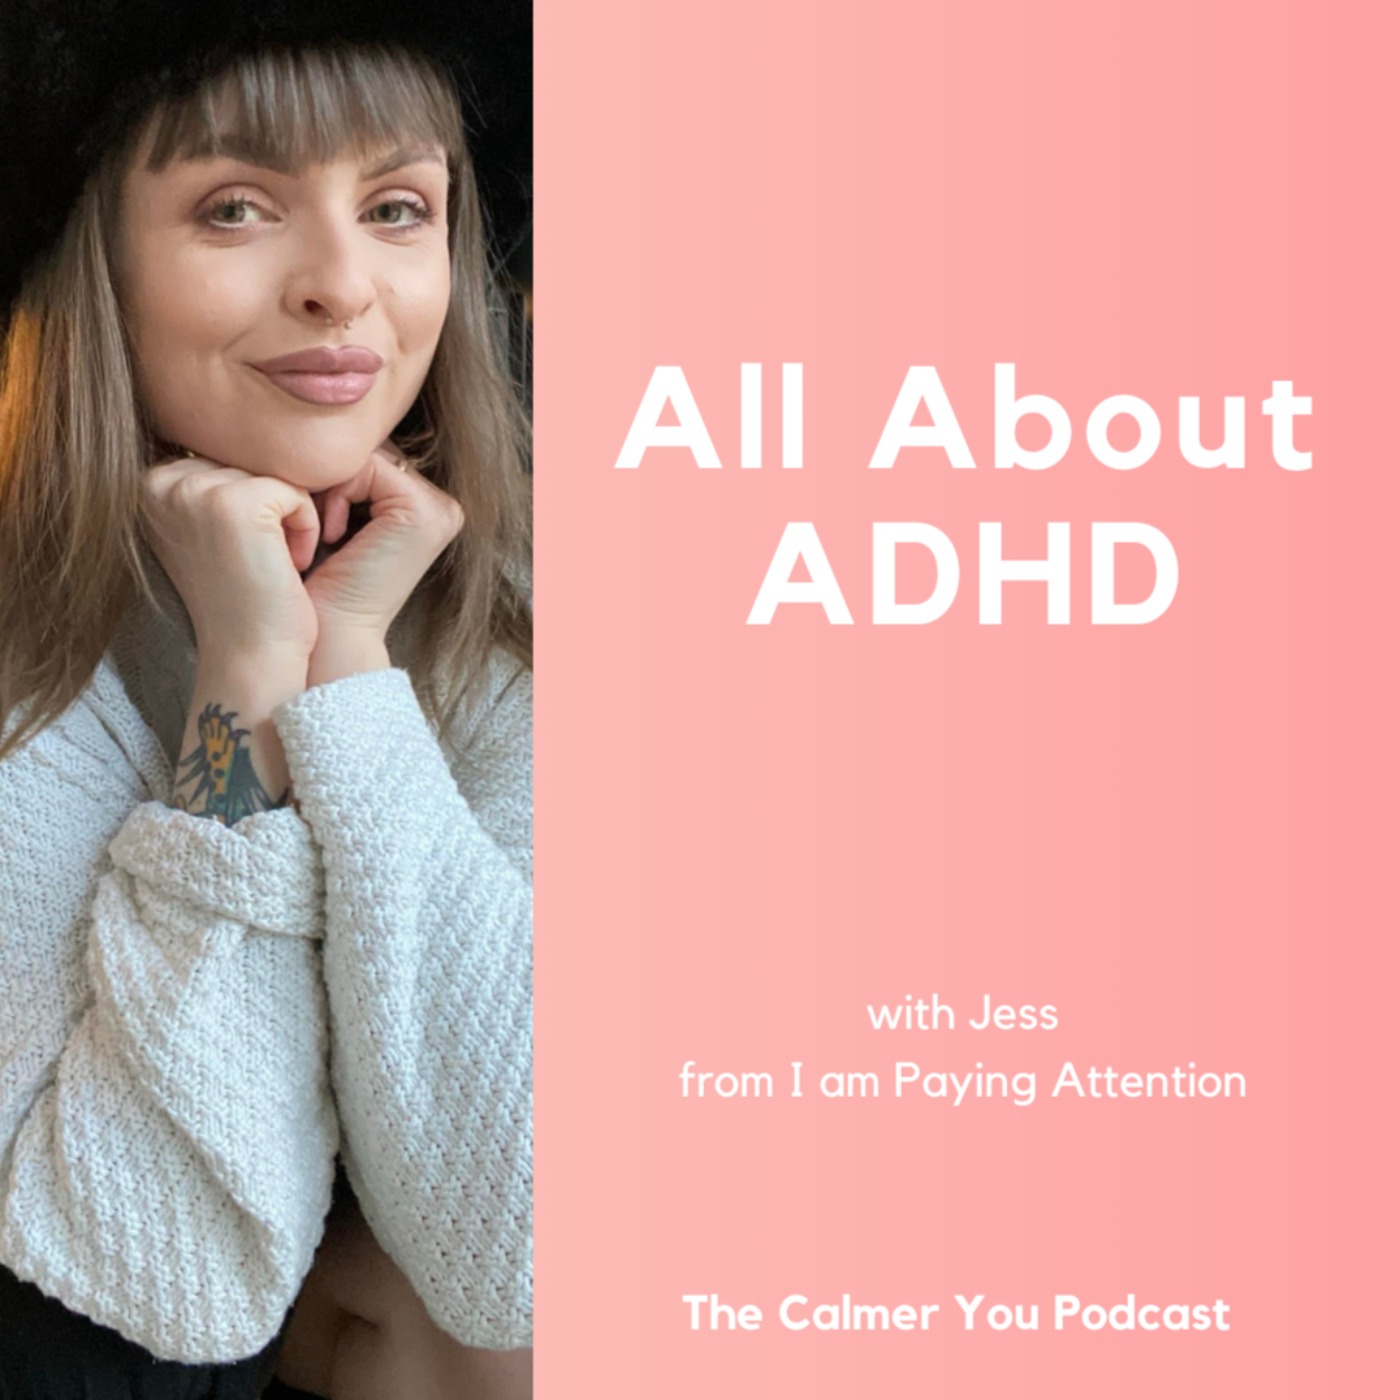 Ep 172. All About ADHD with Jess from I am Paying Attention